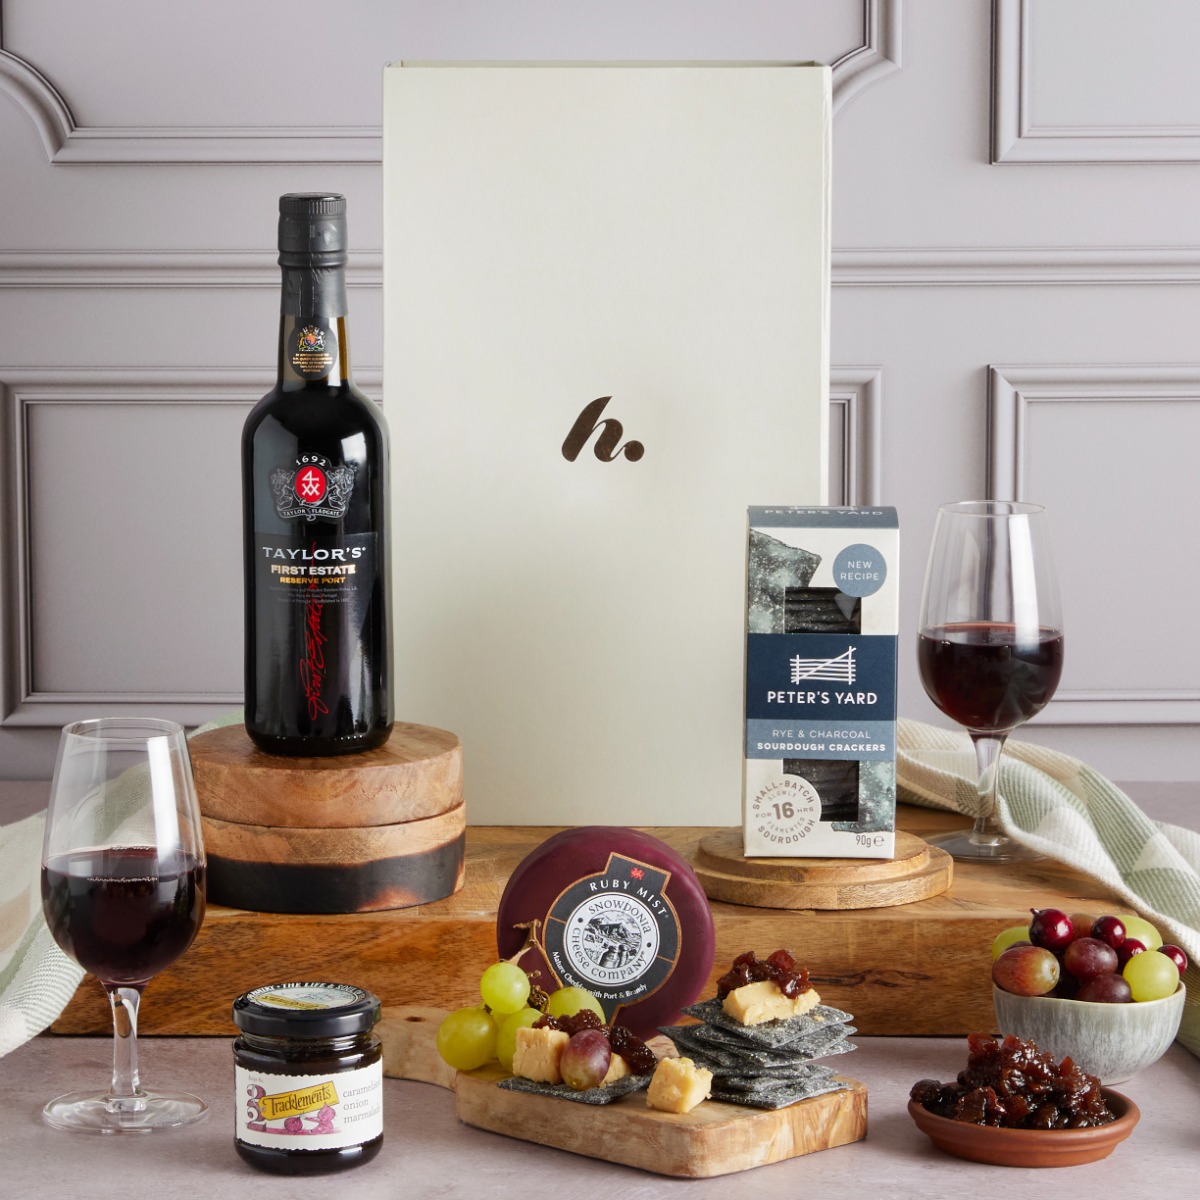 Classic Port & Cheese Hamper Port and Cheese Hampers Hampers.com